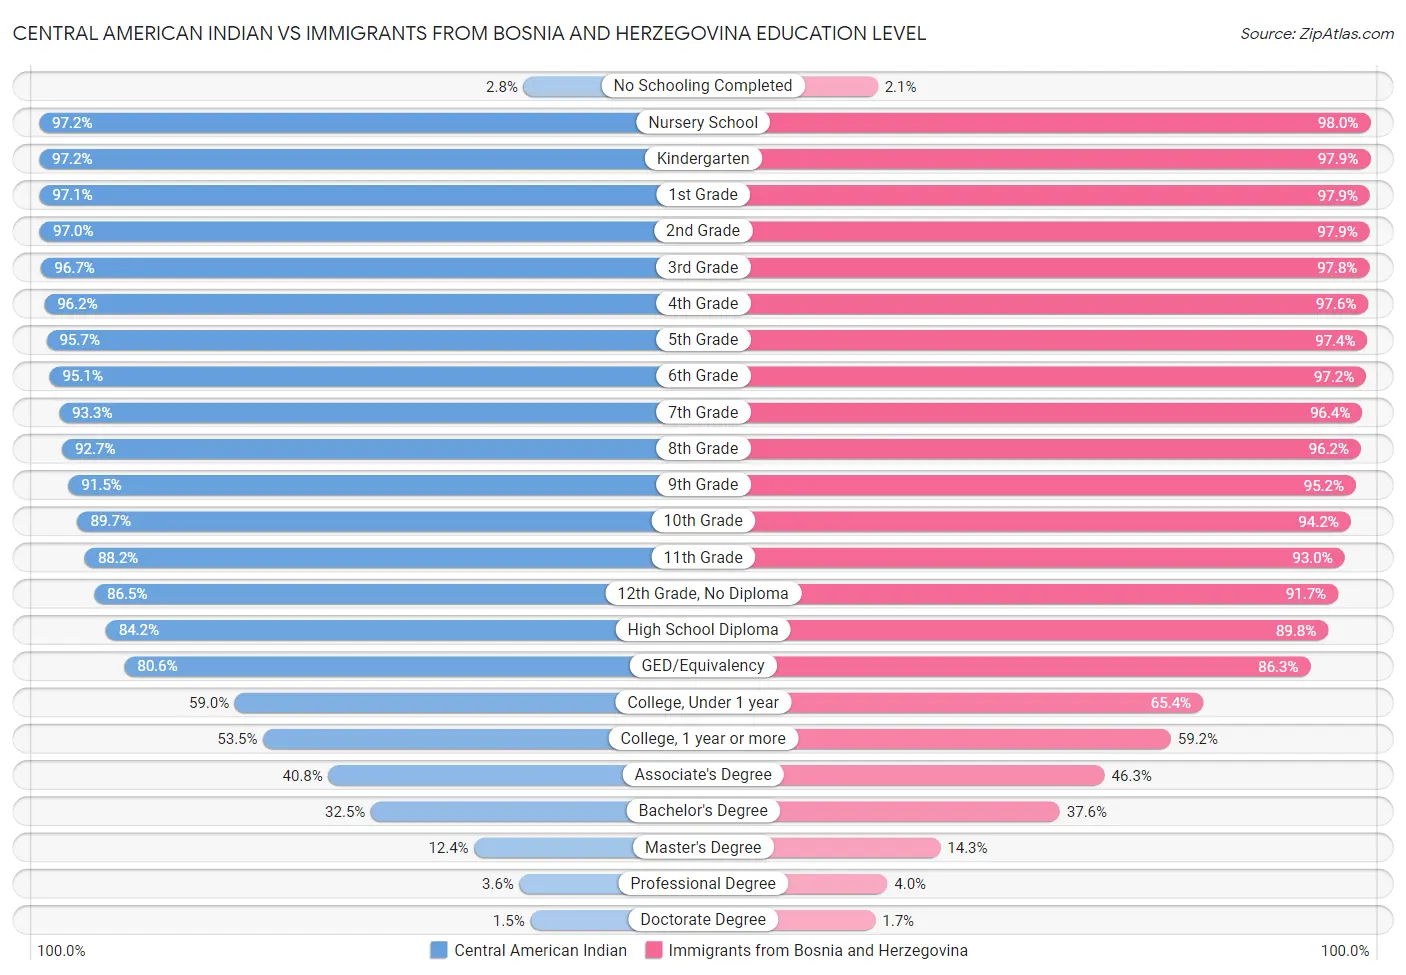 Central American Indian vs Immigrants from Bosnia and Herzegovina Education Level